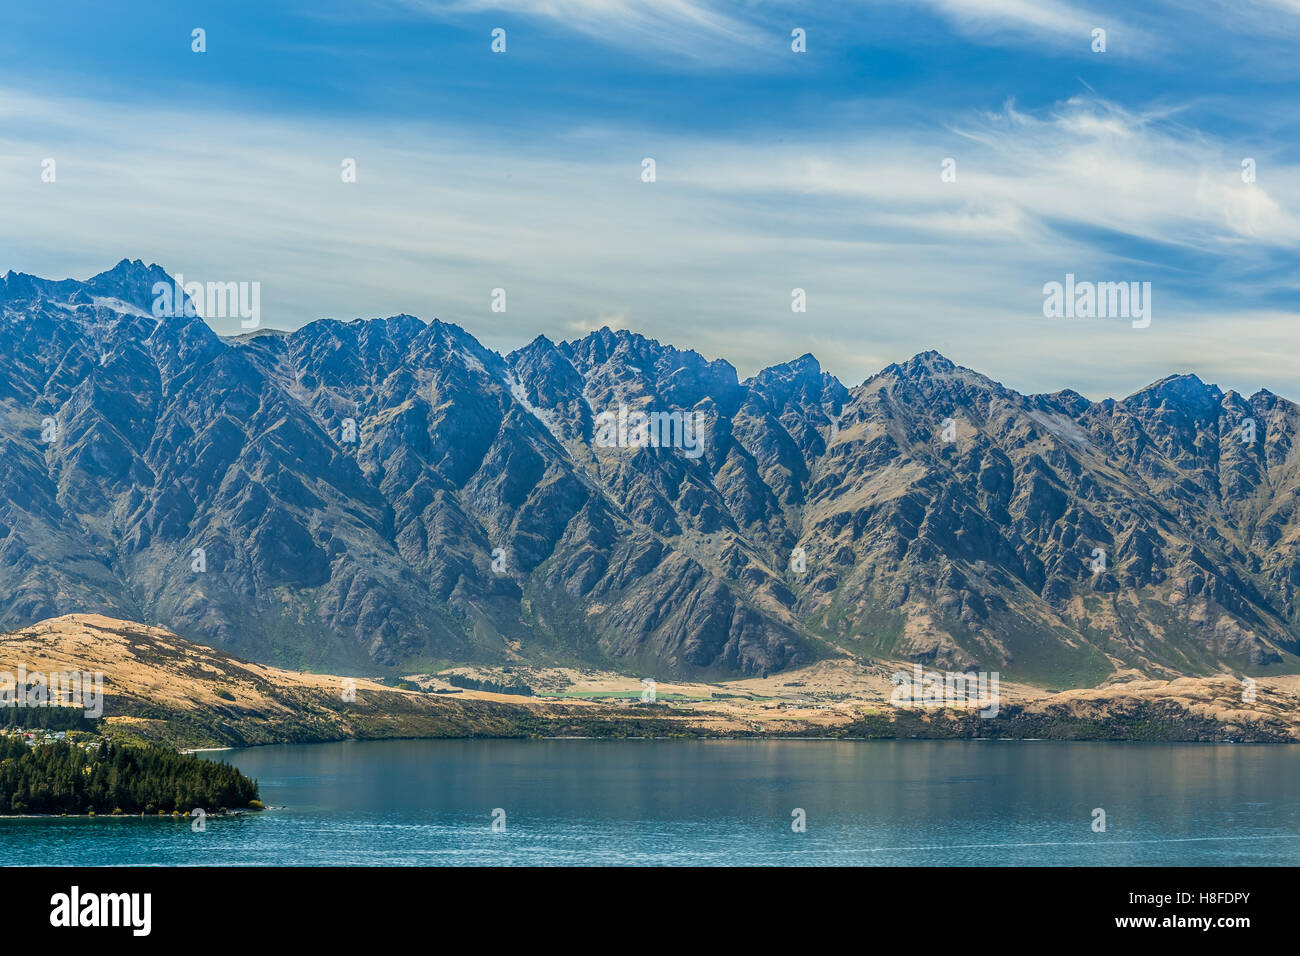 The Remarkables and Lake Wakatipu, Queenstown, New Zealand Stock Photo